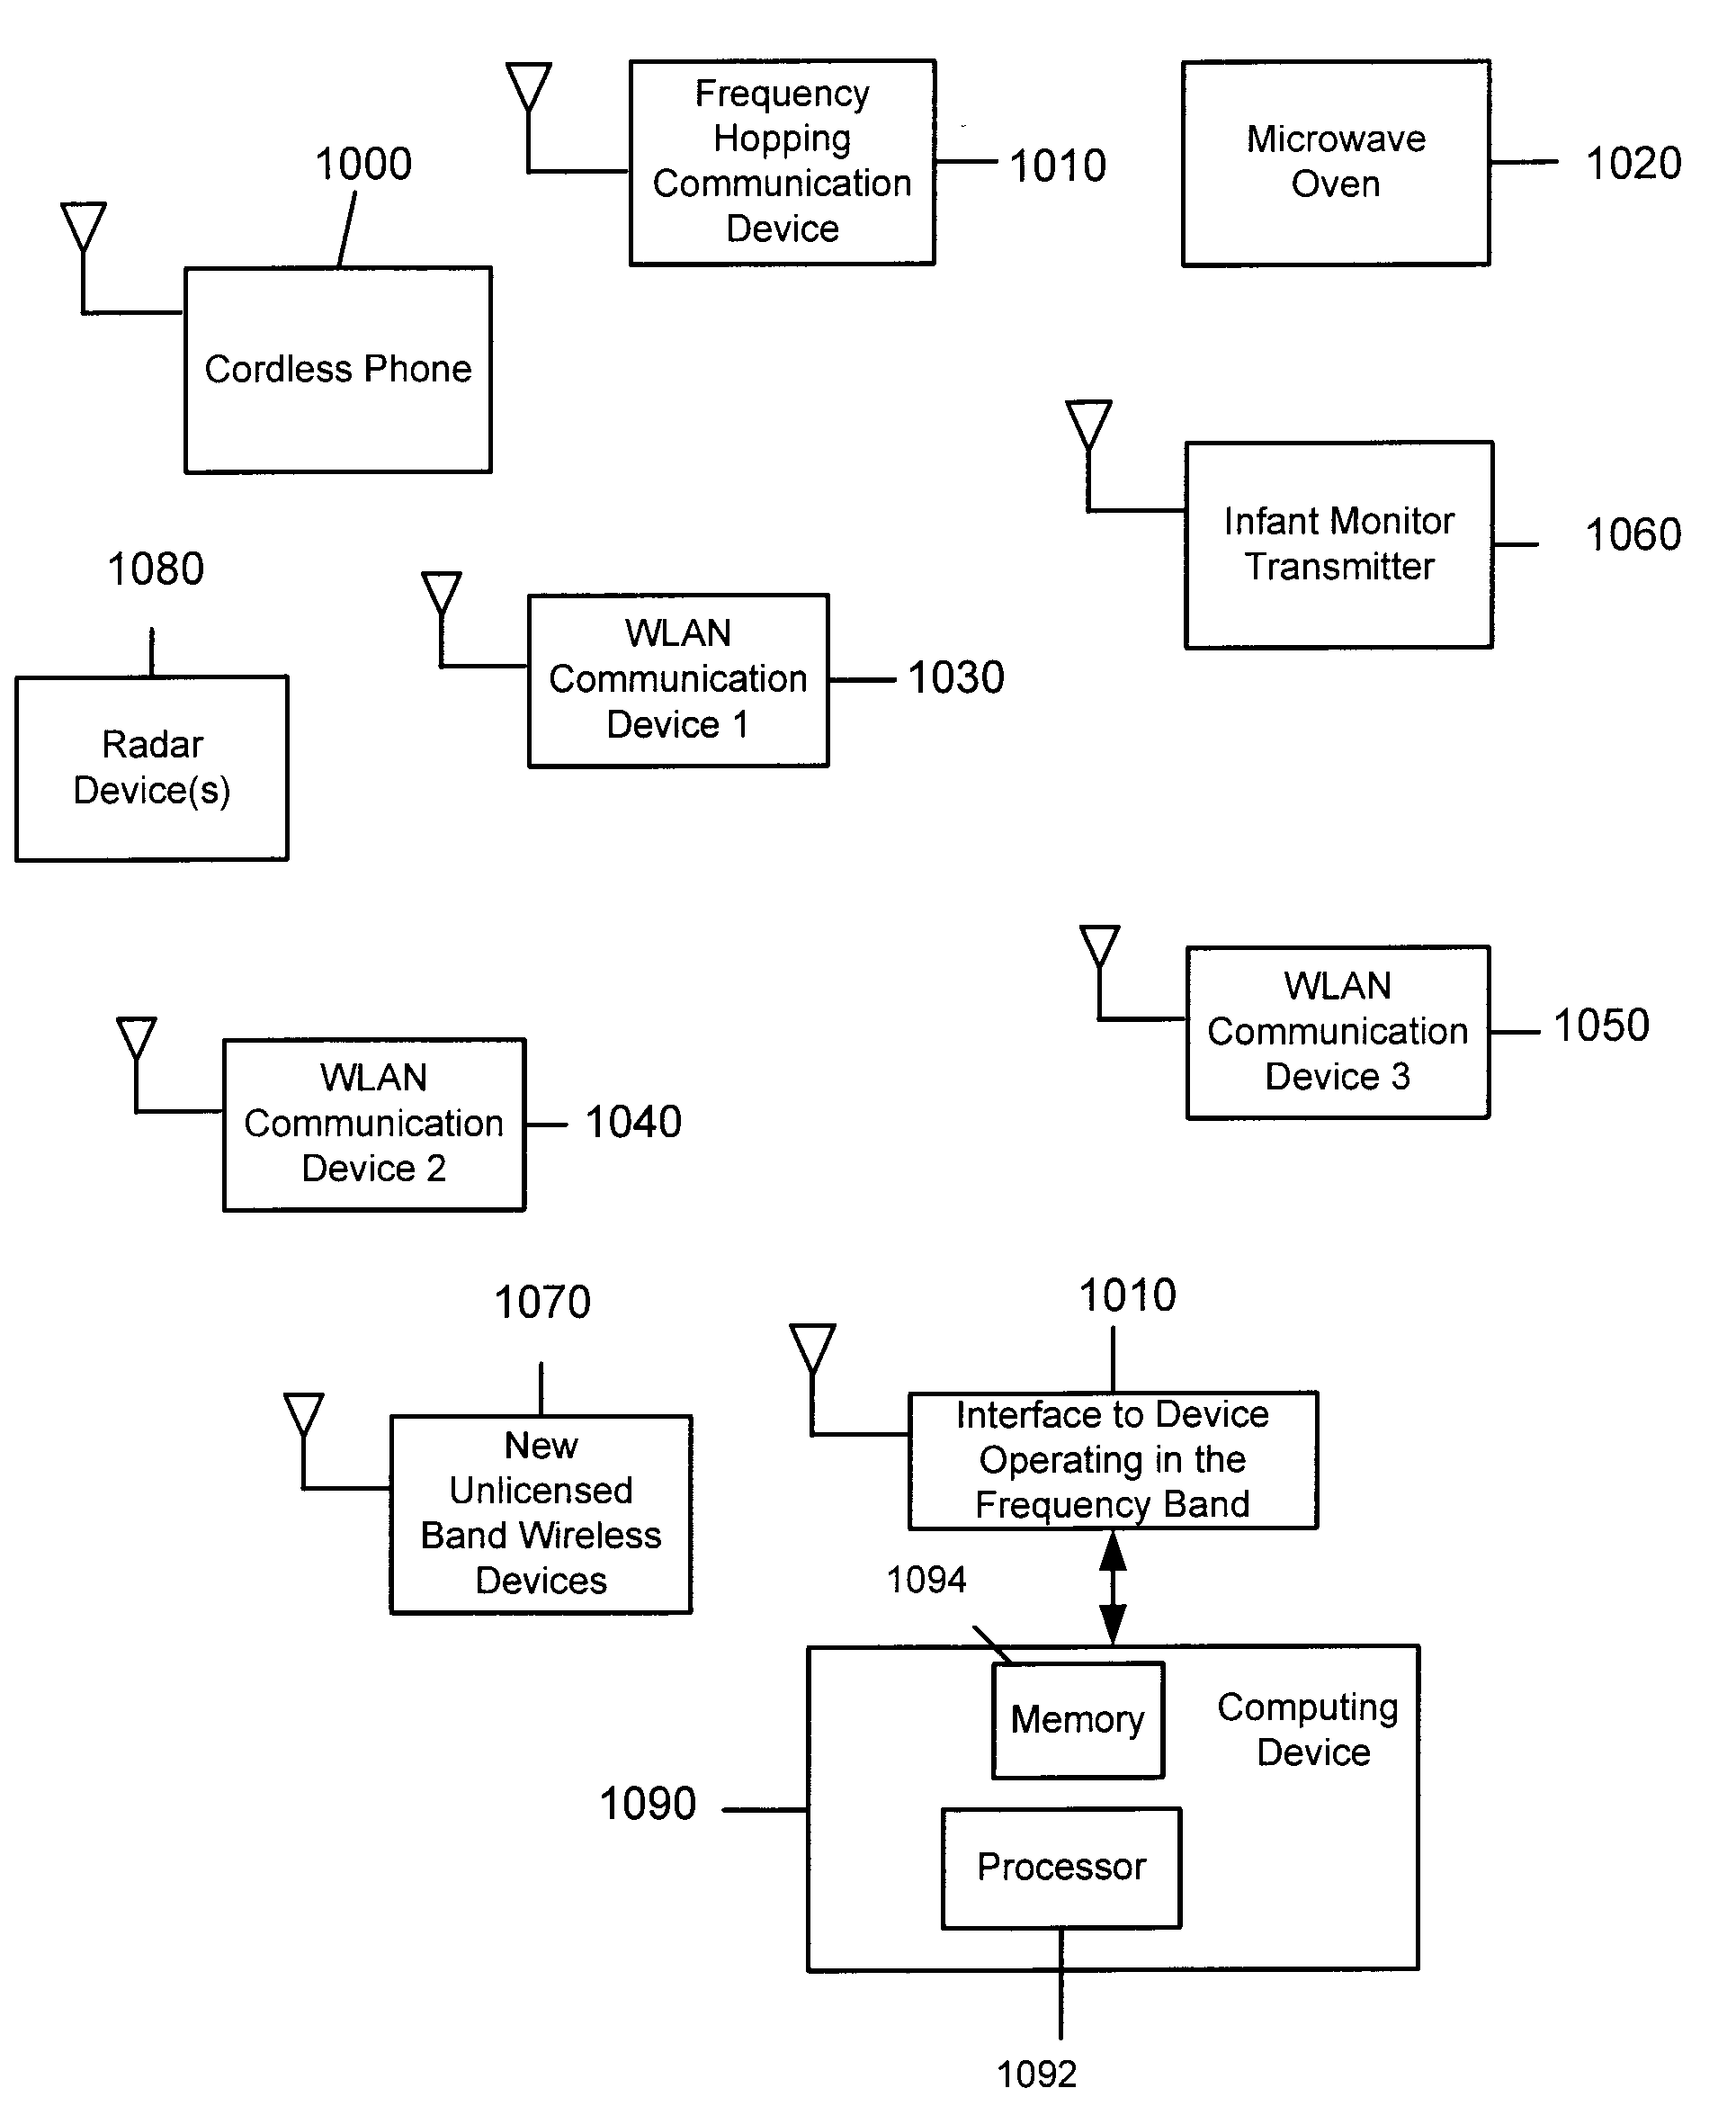 System and Method for Spectrum Management of a Shared Frequency Band